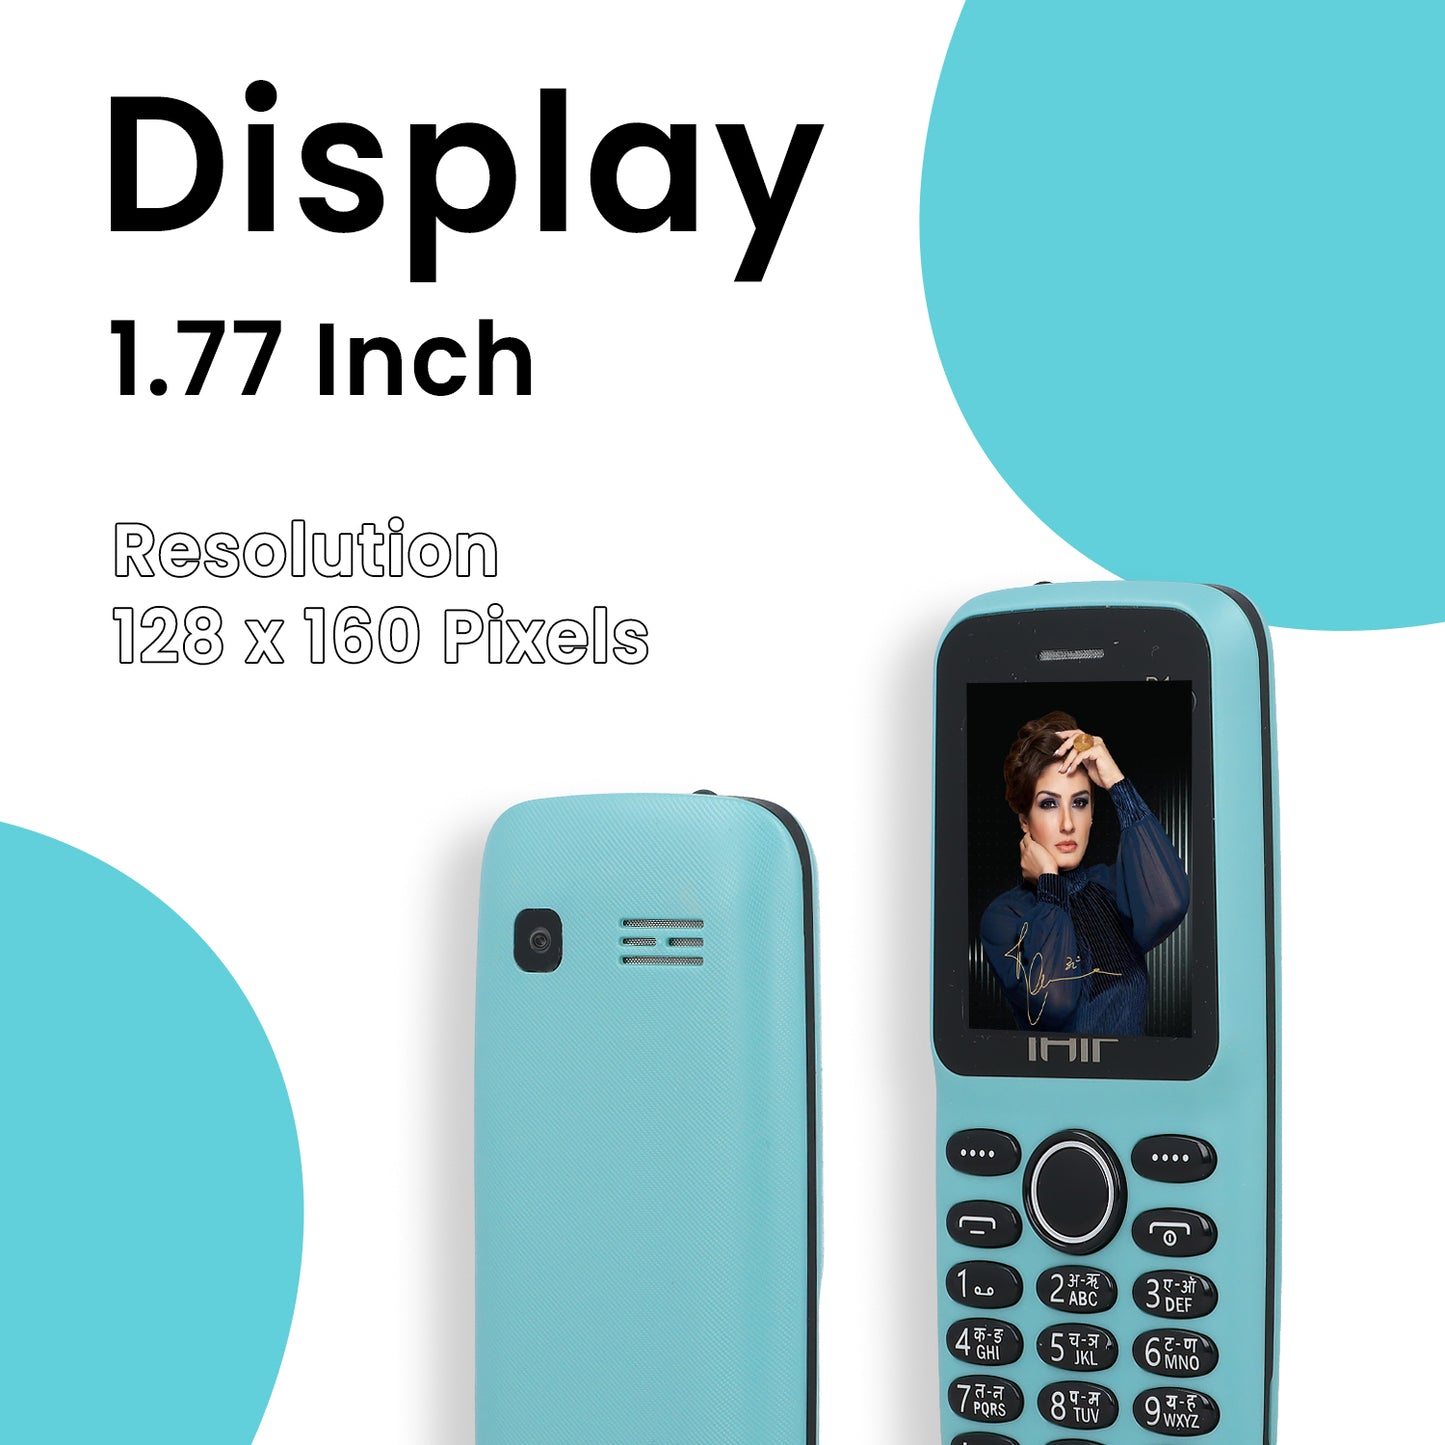 IAIR D1 Keypad Mobile Phone| Dual Sim| 1200mh Battery, Expandable Storage Upto 32GB| MP3 with Recording, Camera